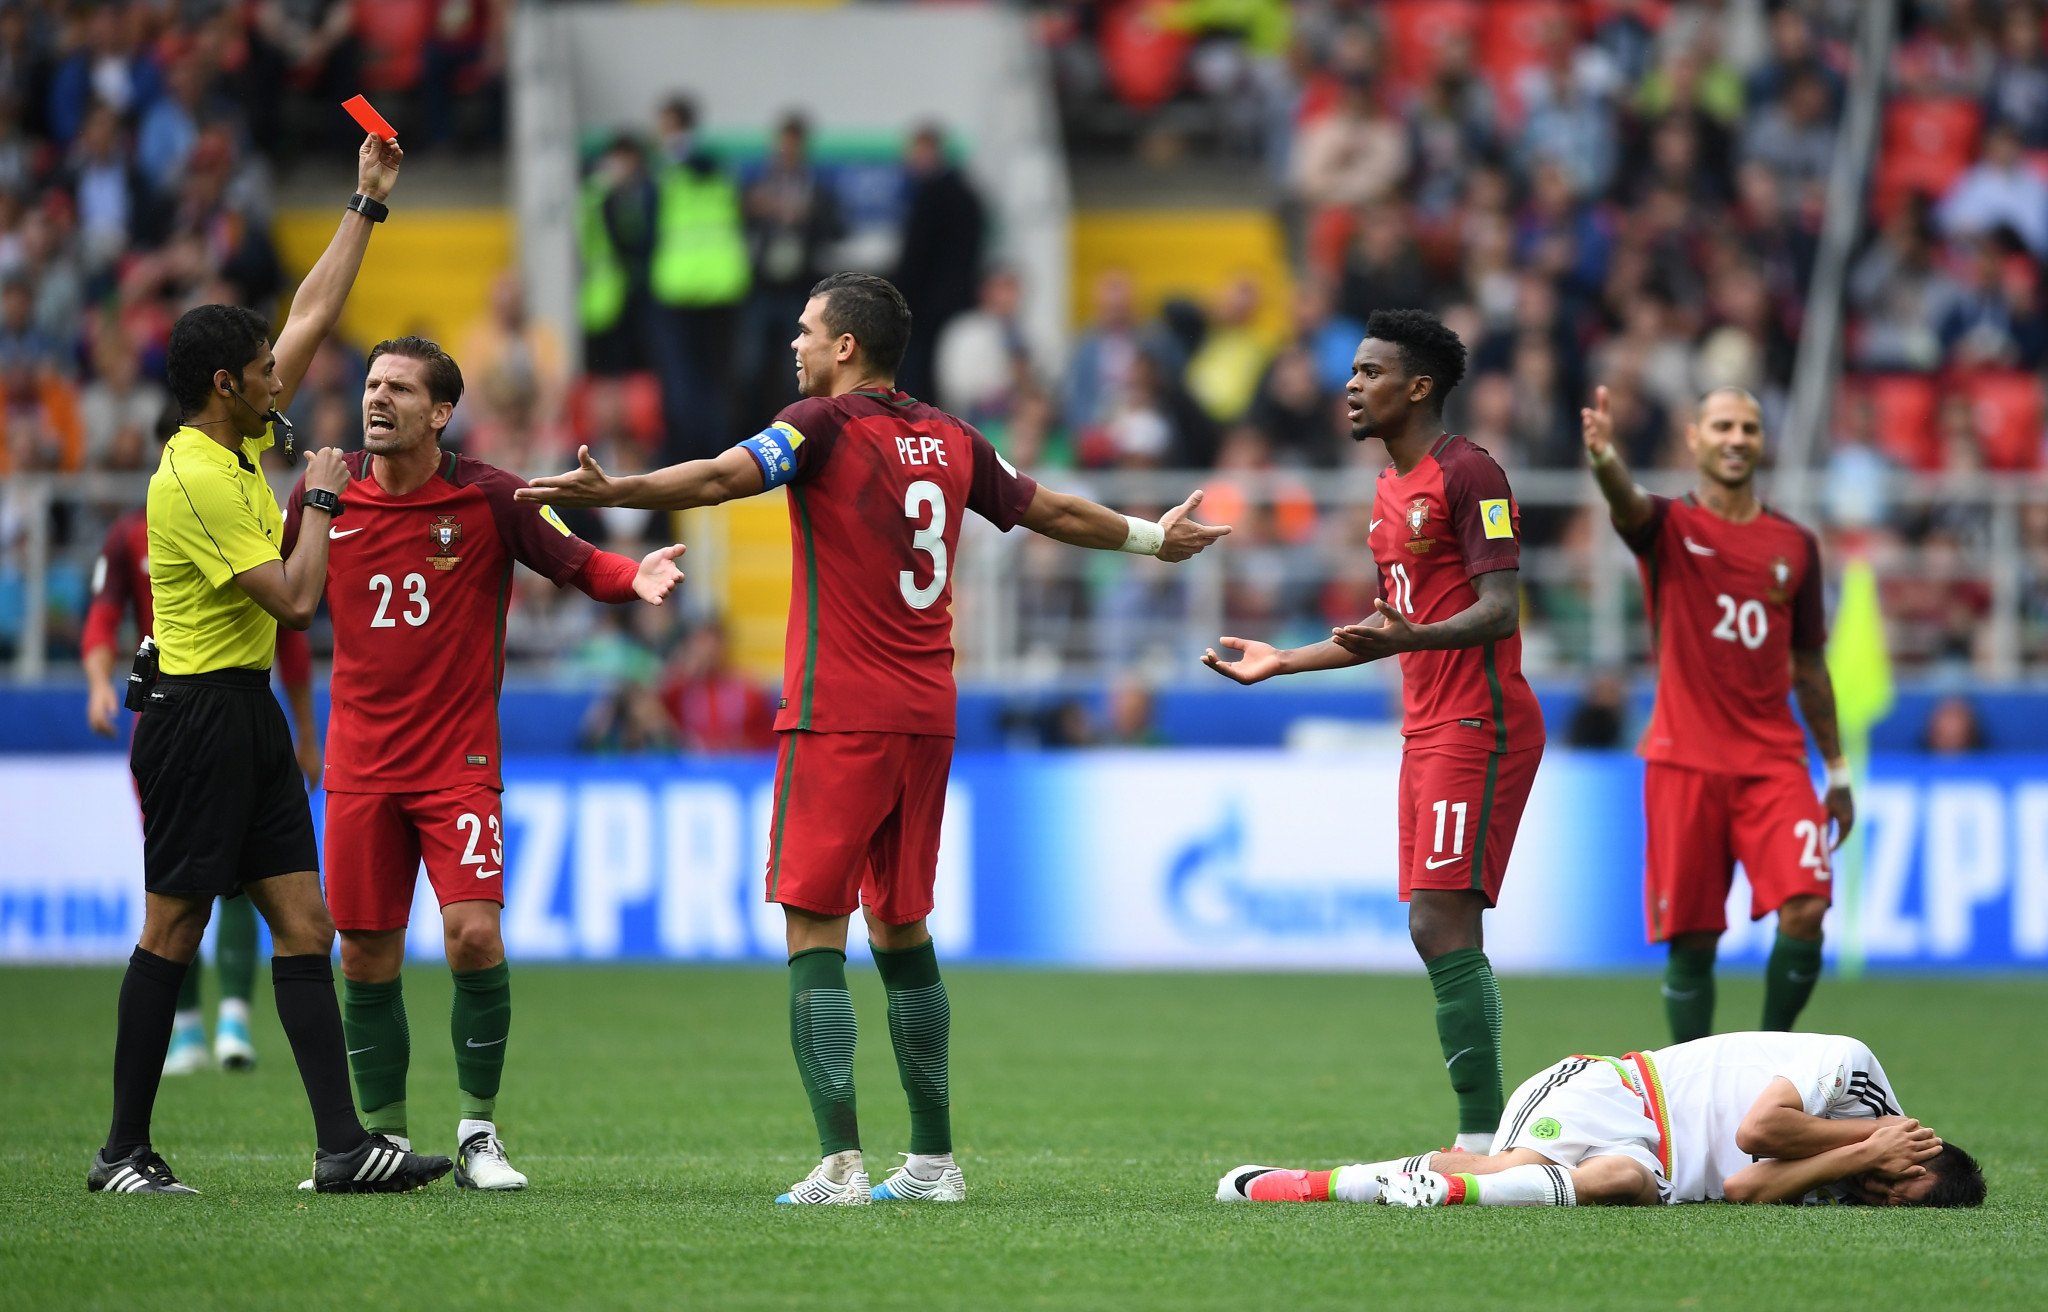 Fahad Al-Mirdasi took charge of the third-place match between Portugal and Mexico at last year's Confederations Cup ©Getty Images